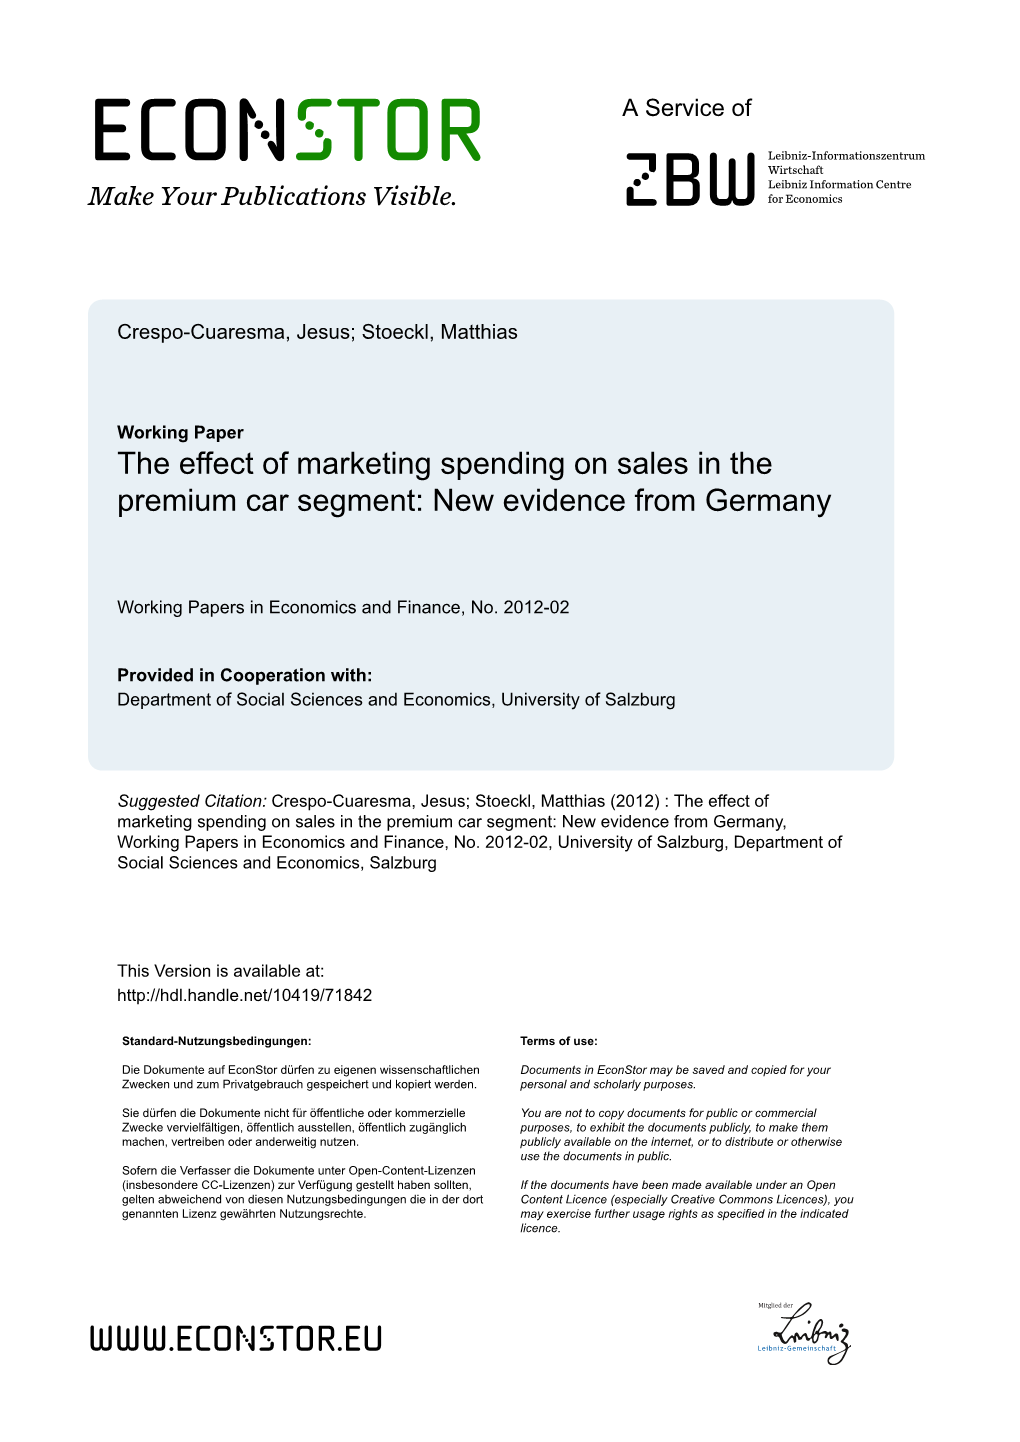 The Effect of Marketing Spending on Sales in the Premium Car Segment: New Evidence from Germany